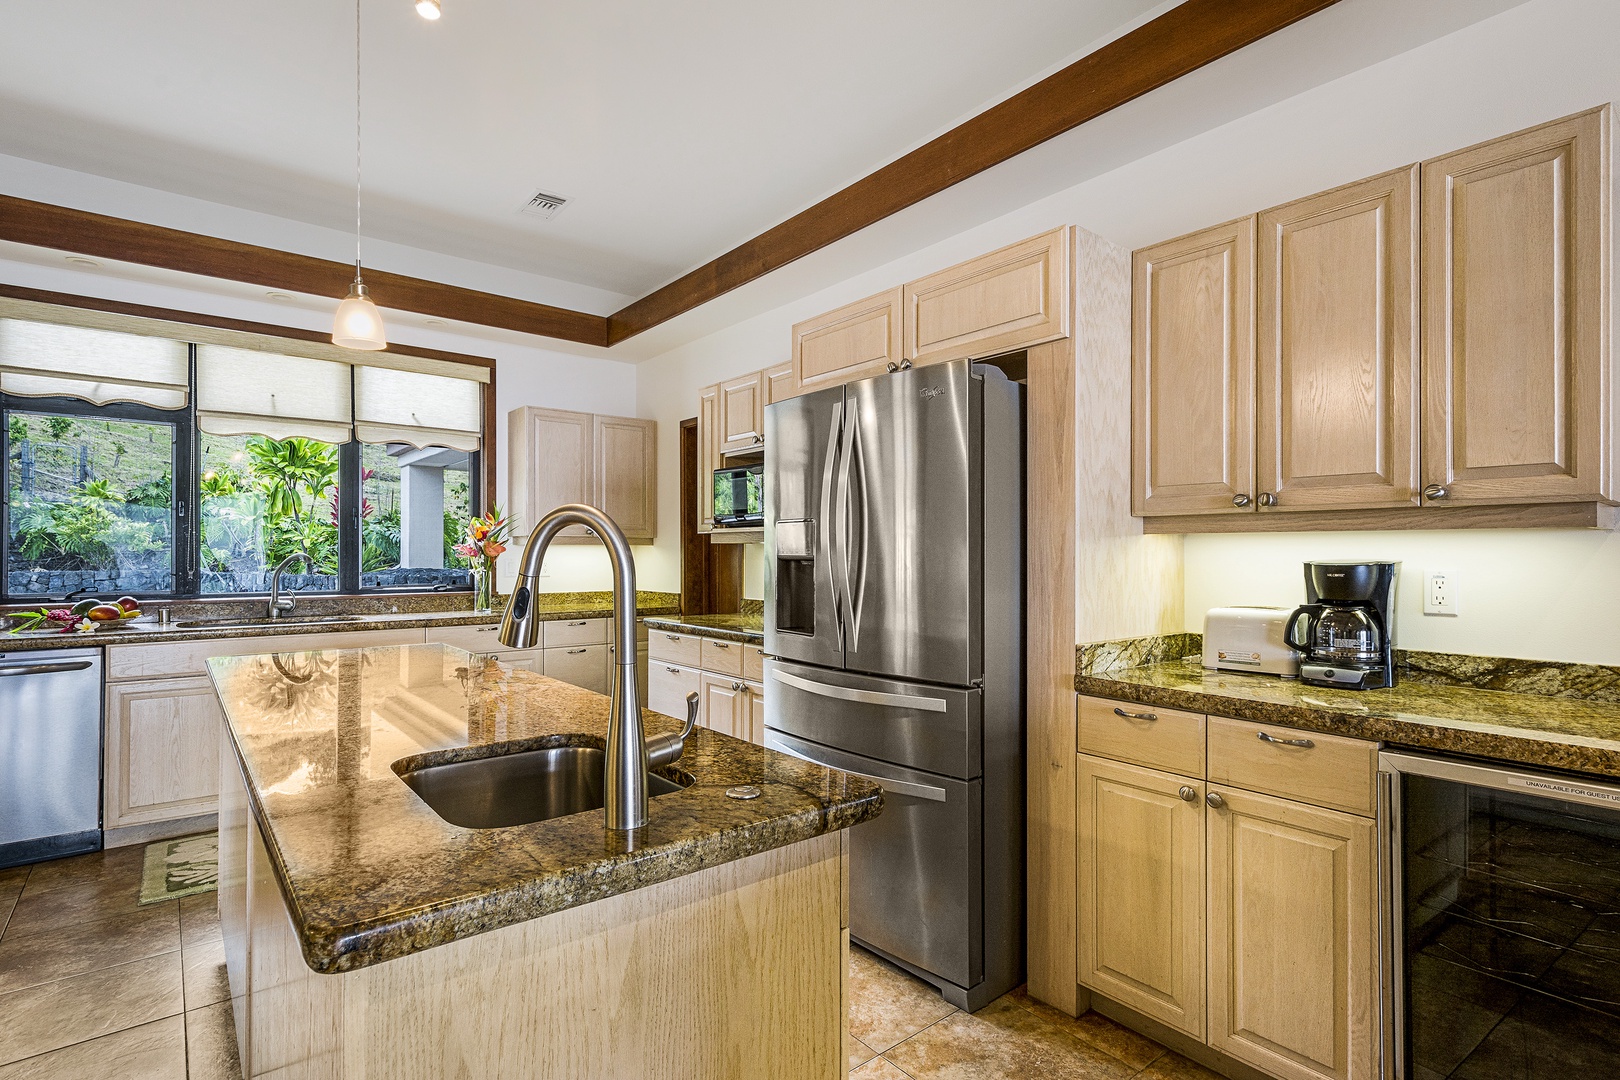 Kailua Kona Vacation Rentals, O'oma Plantation - This kitchen is equipped with two sinks for your convenience